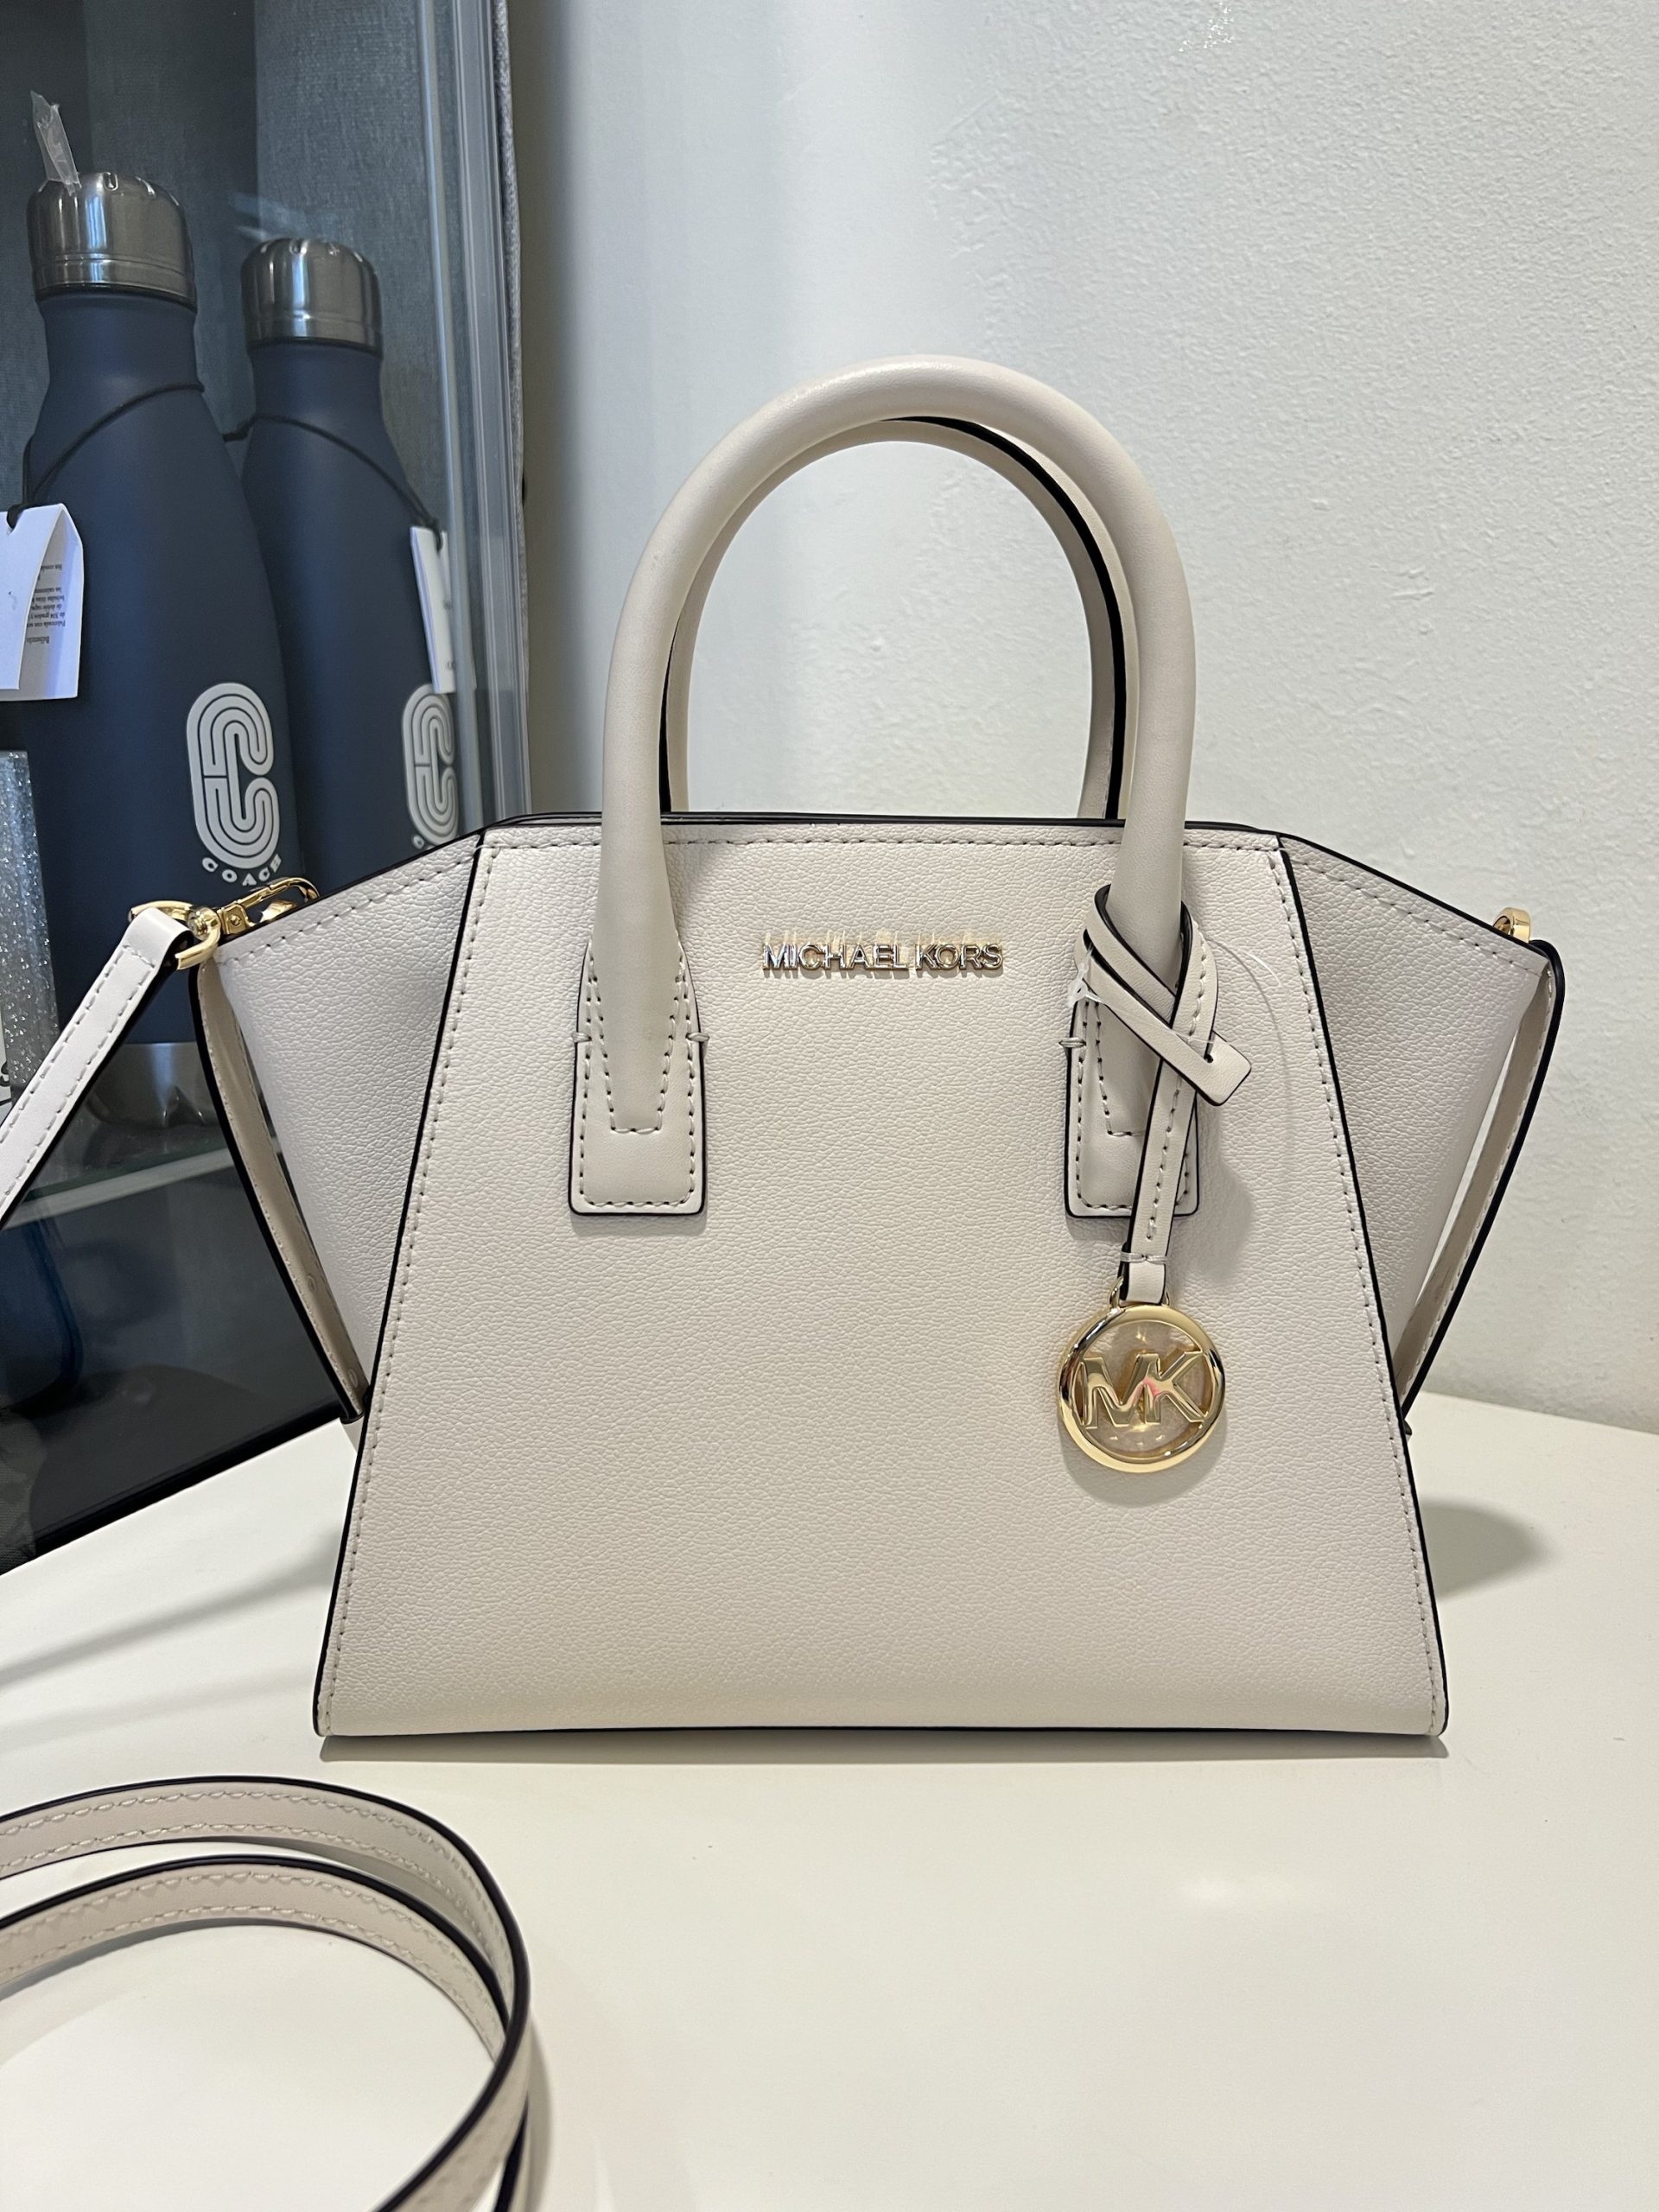 Where to get the Michael Kors MK My Way personalising experience in KL